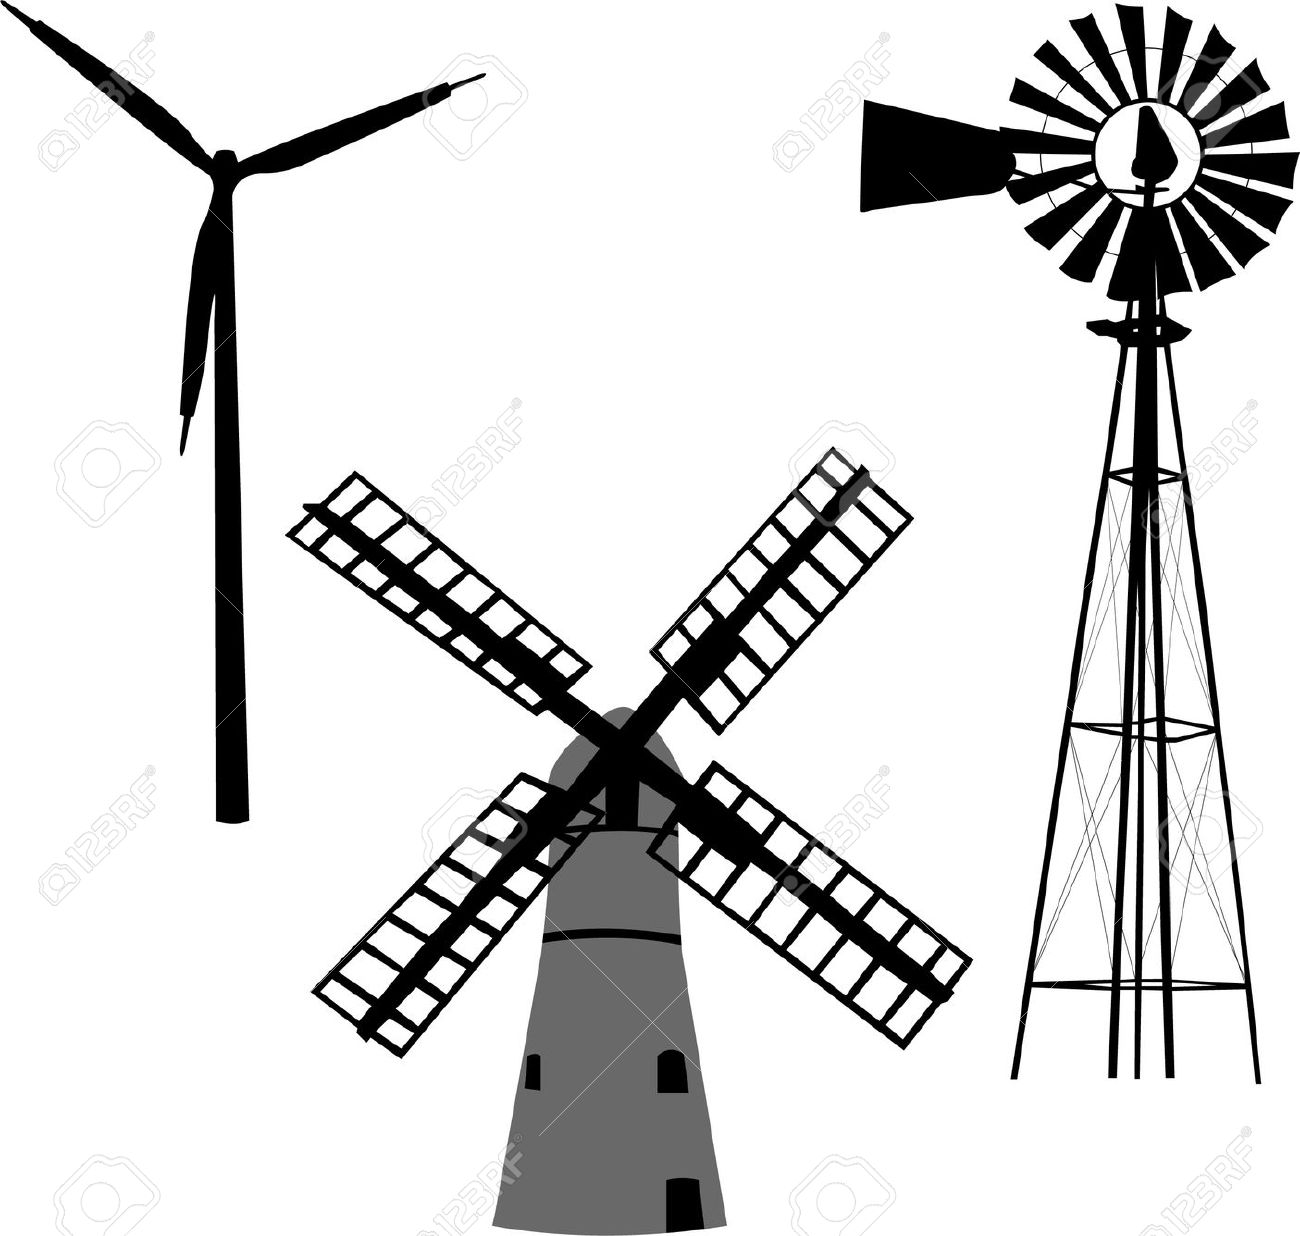 Collection windmill clipart.